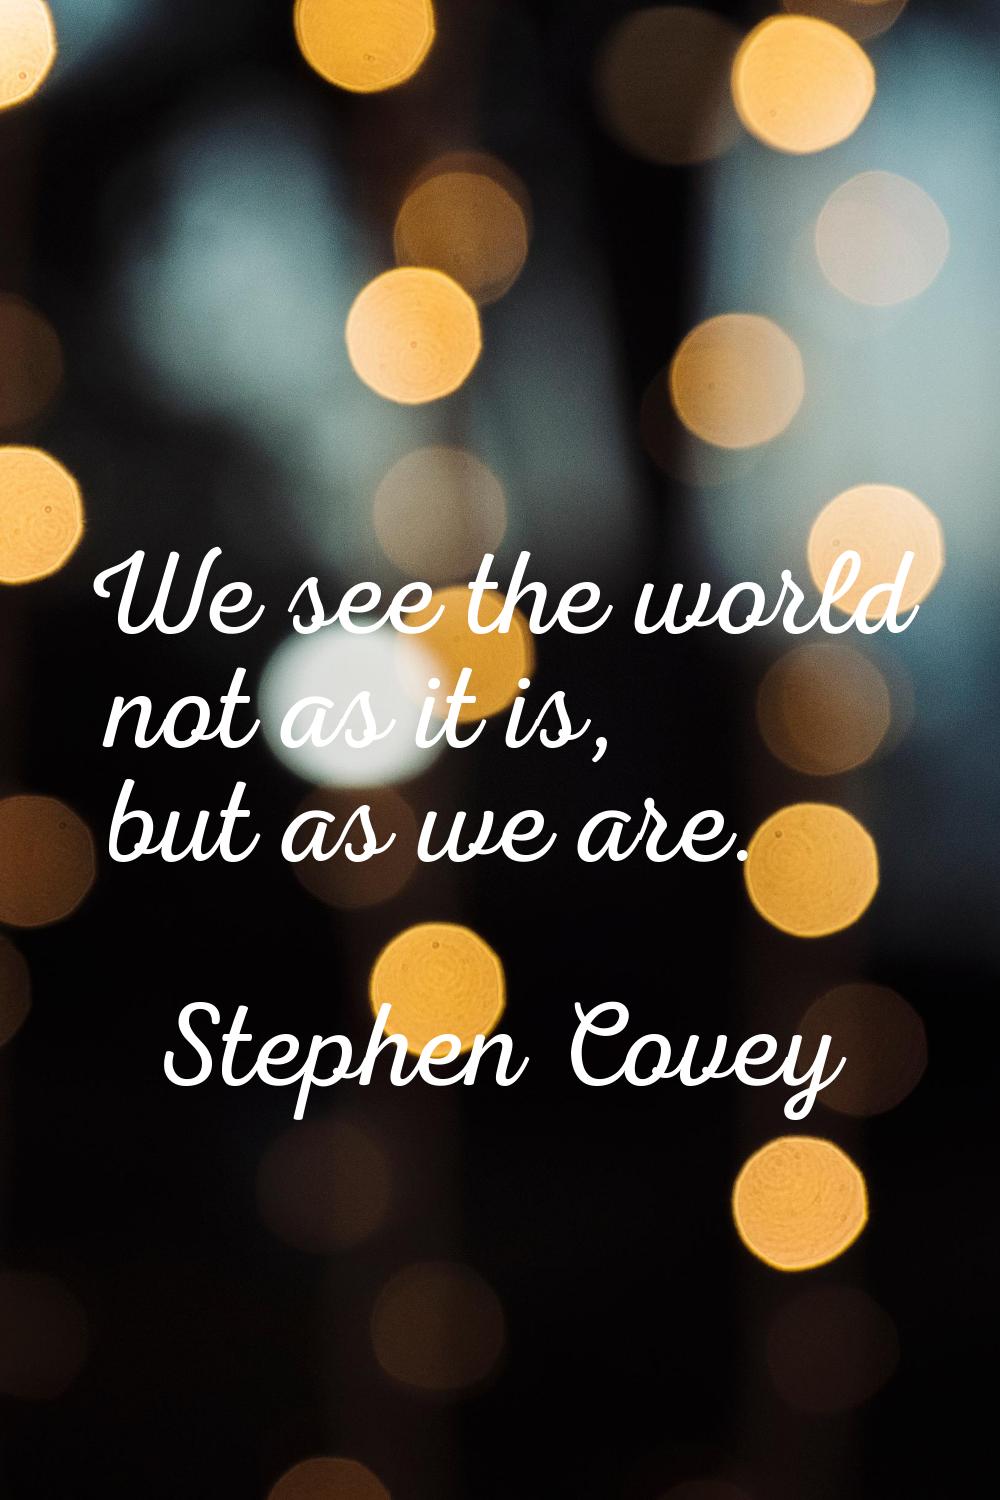 We see the world not as it is, but as we are.